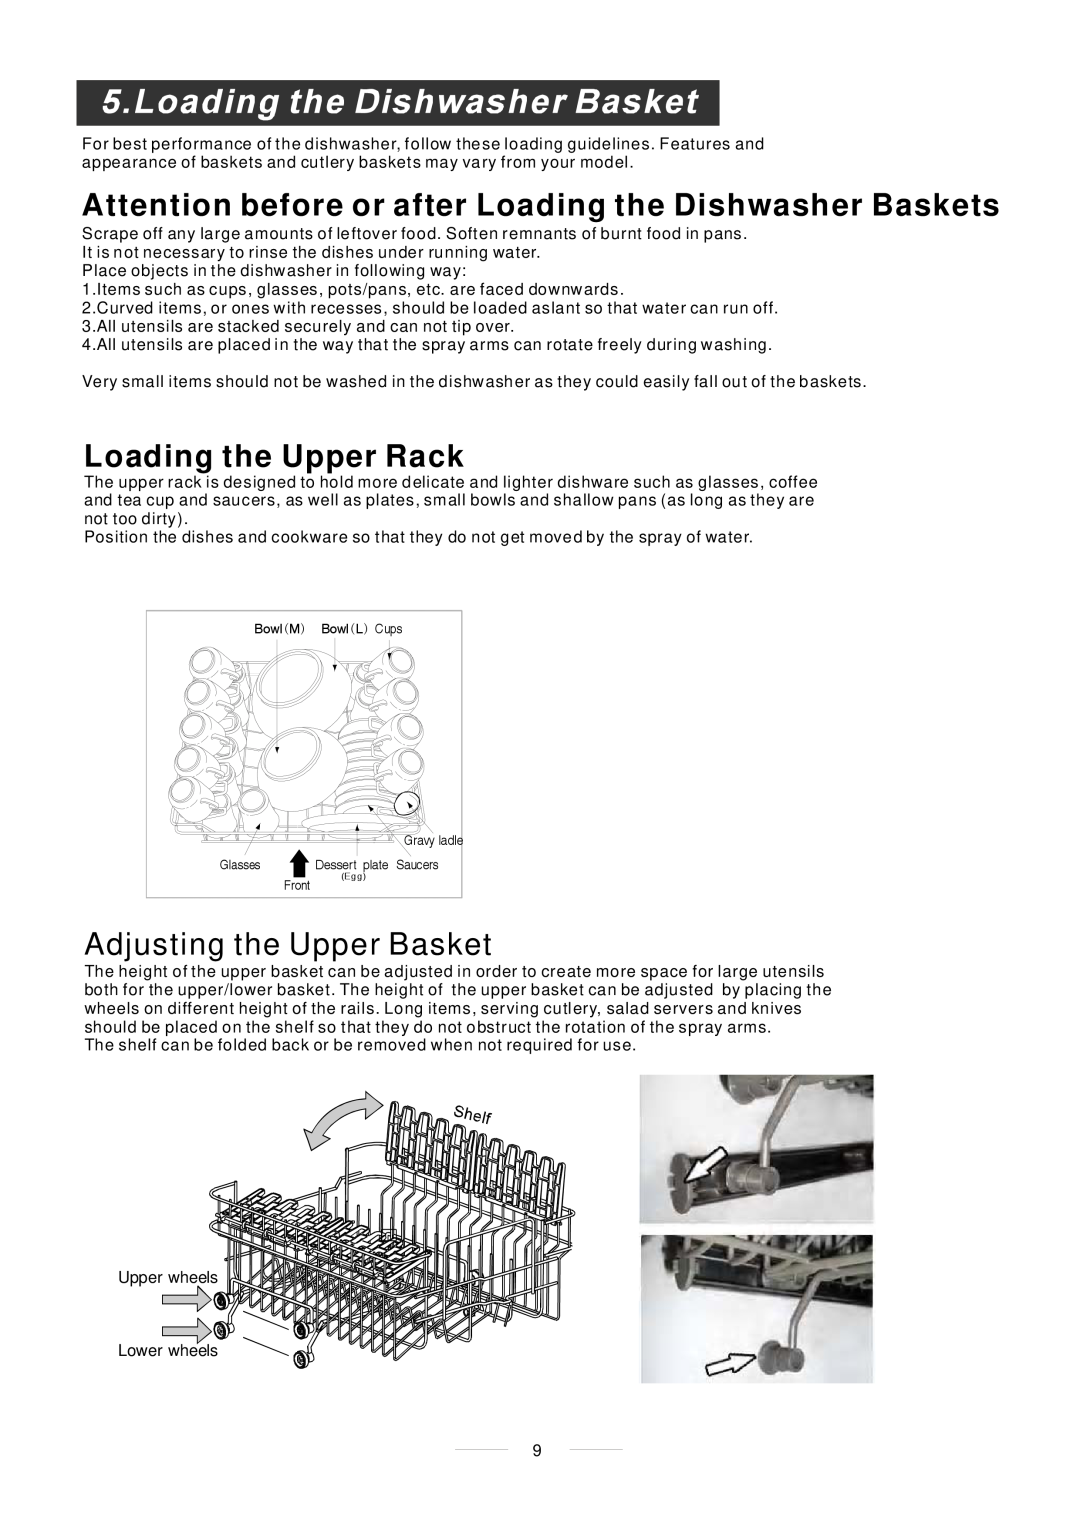 Whirlpool ADP 750 manual Attention before or after Loading the Dishwasher Baskets, Loading the Upper Rack 